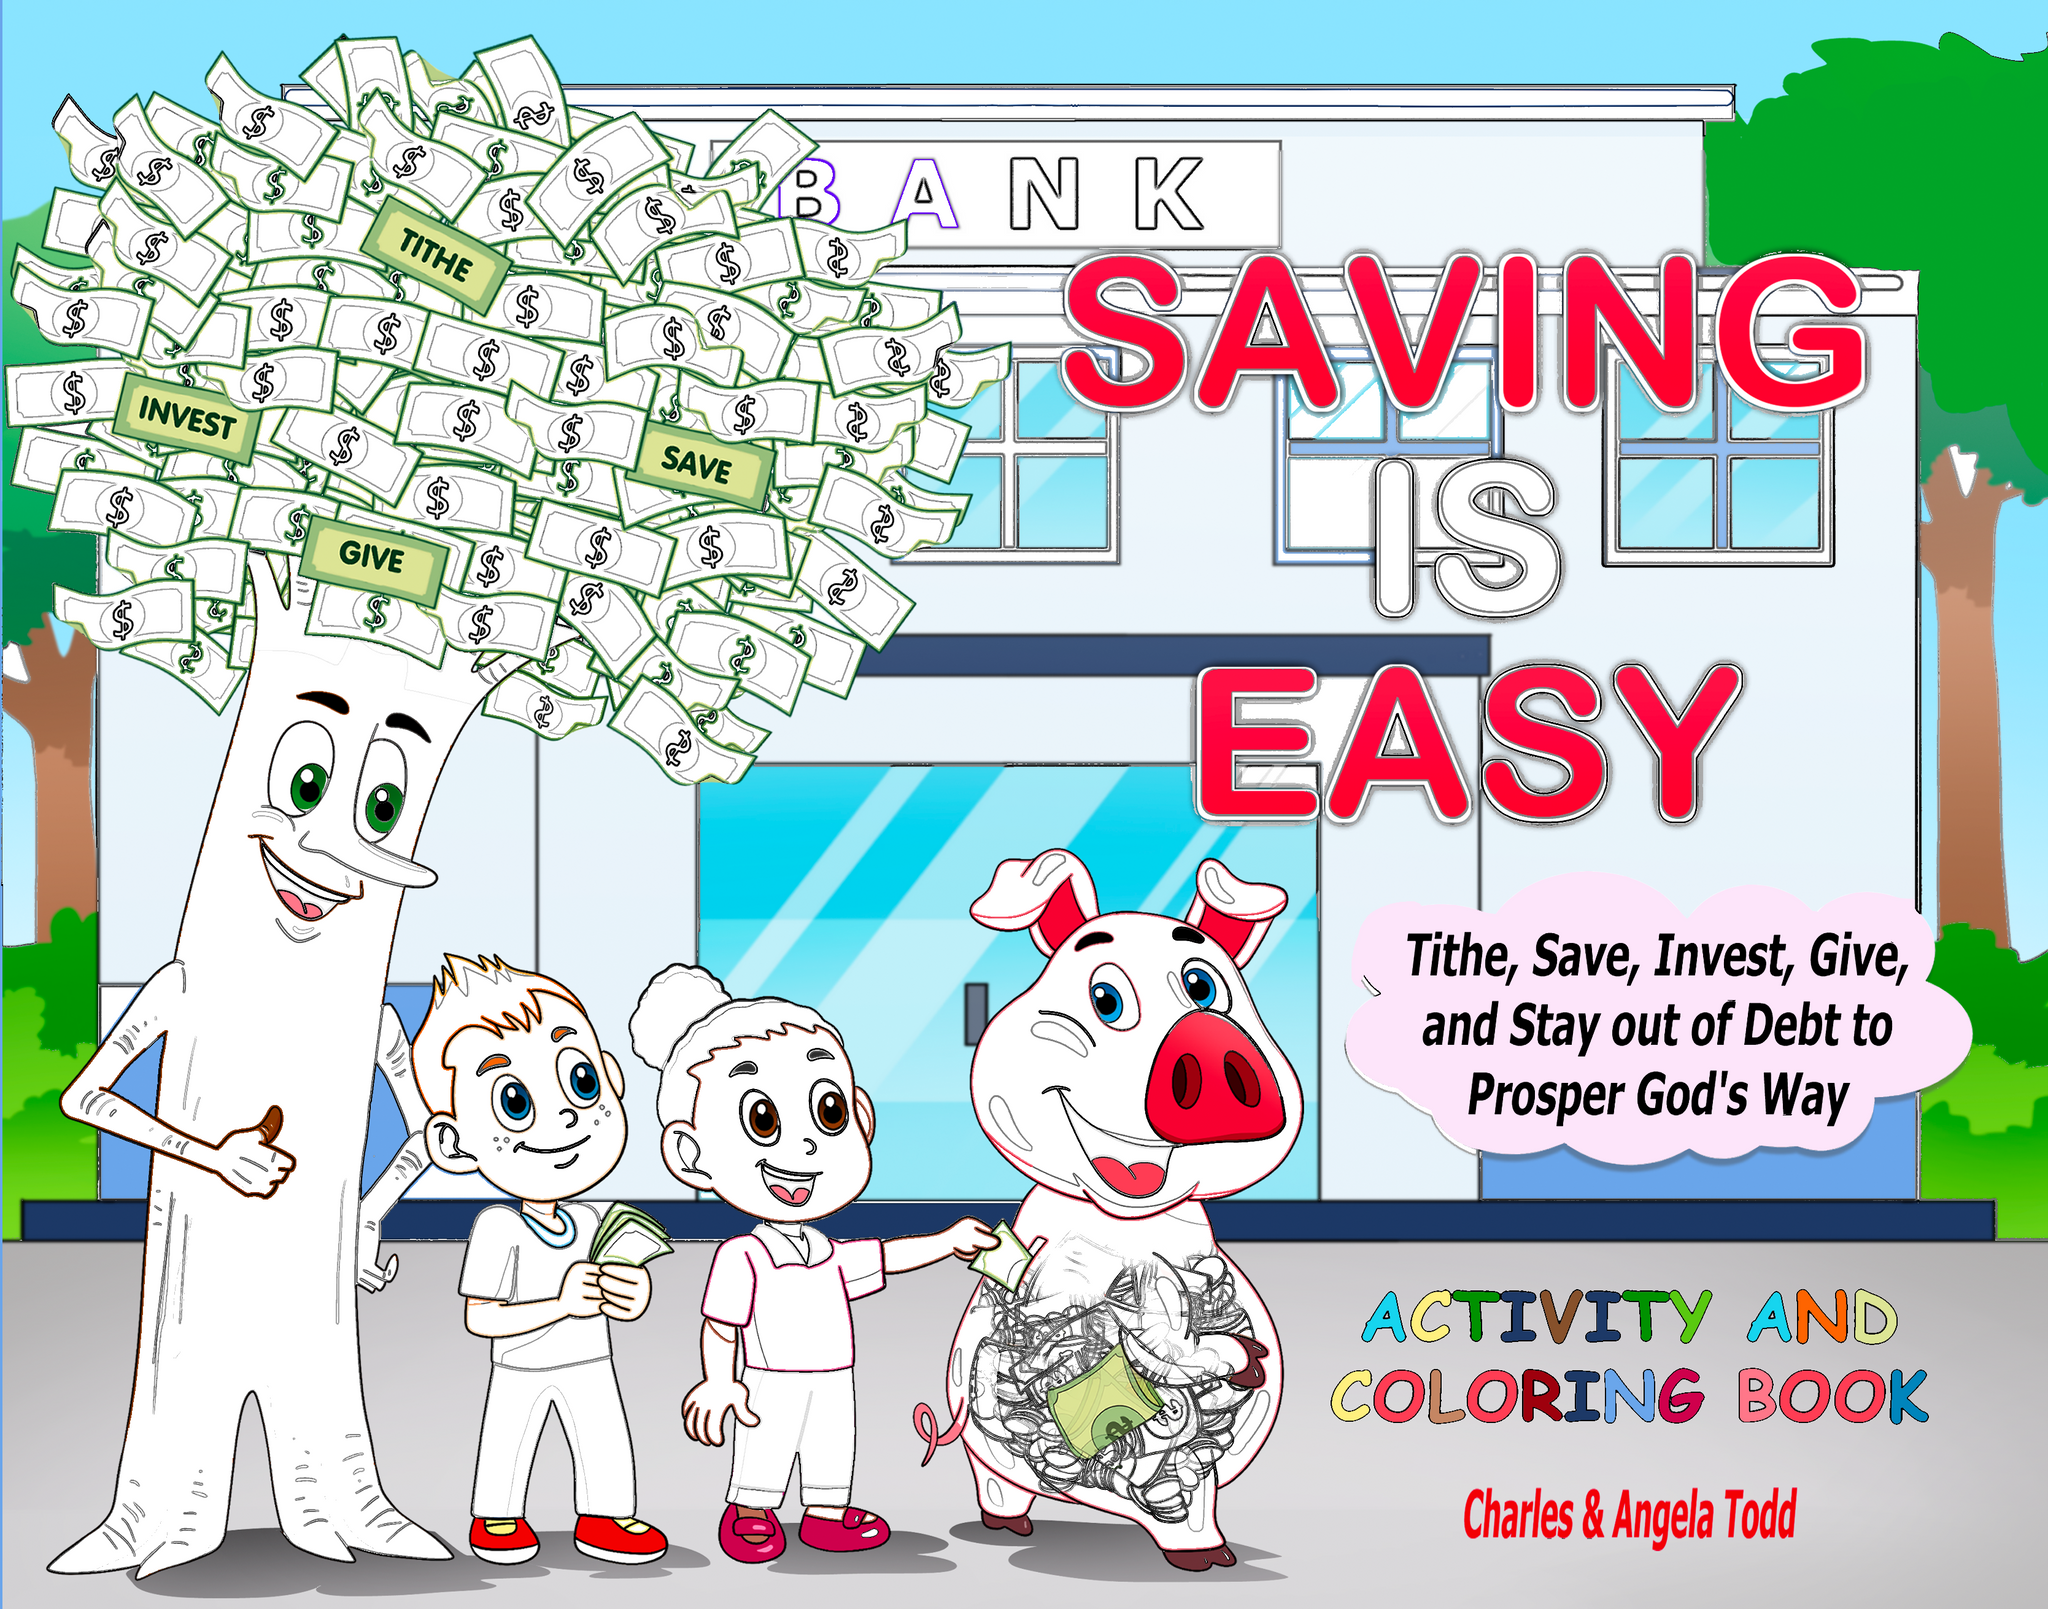 SAVING IS EASY, Activity & Coloring Book - (Landscape 11x8.5)